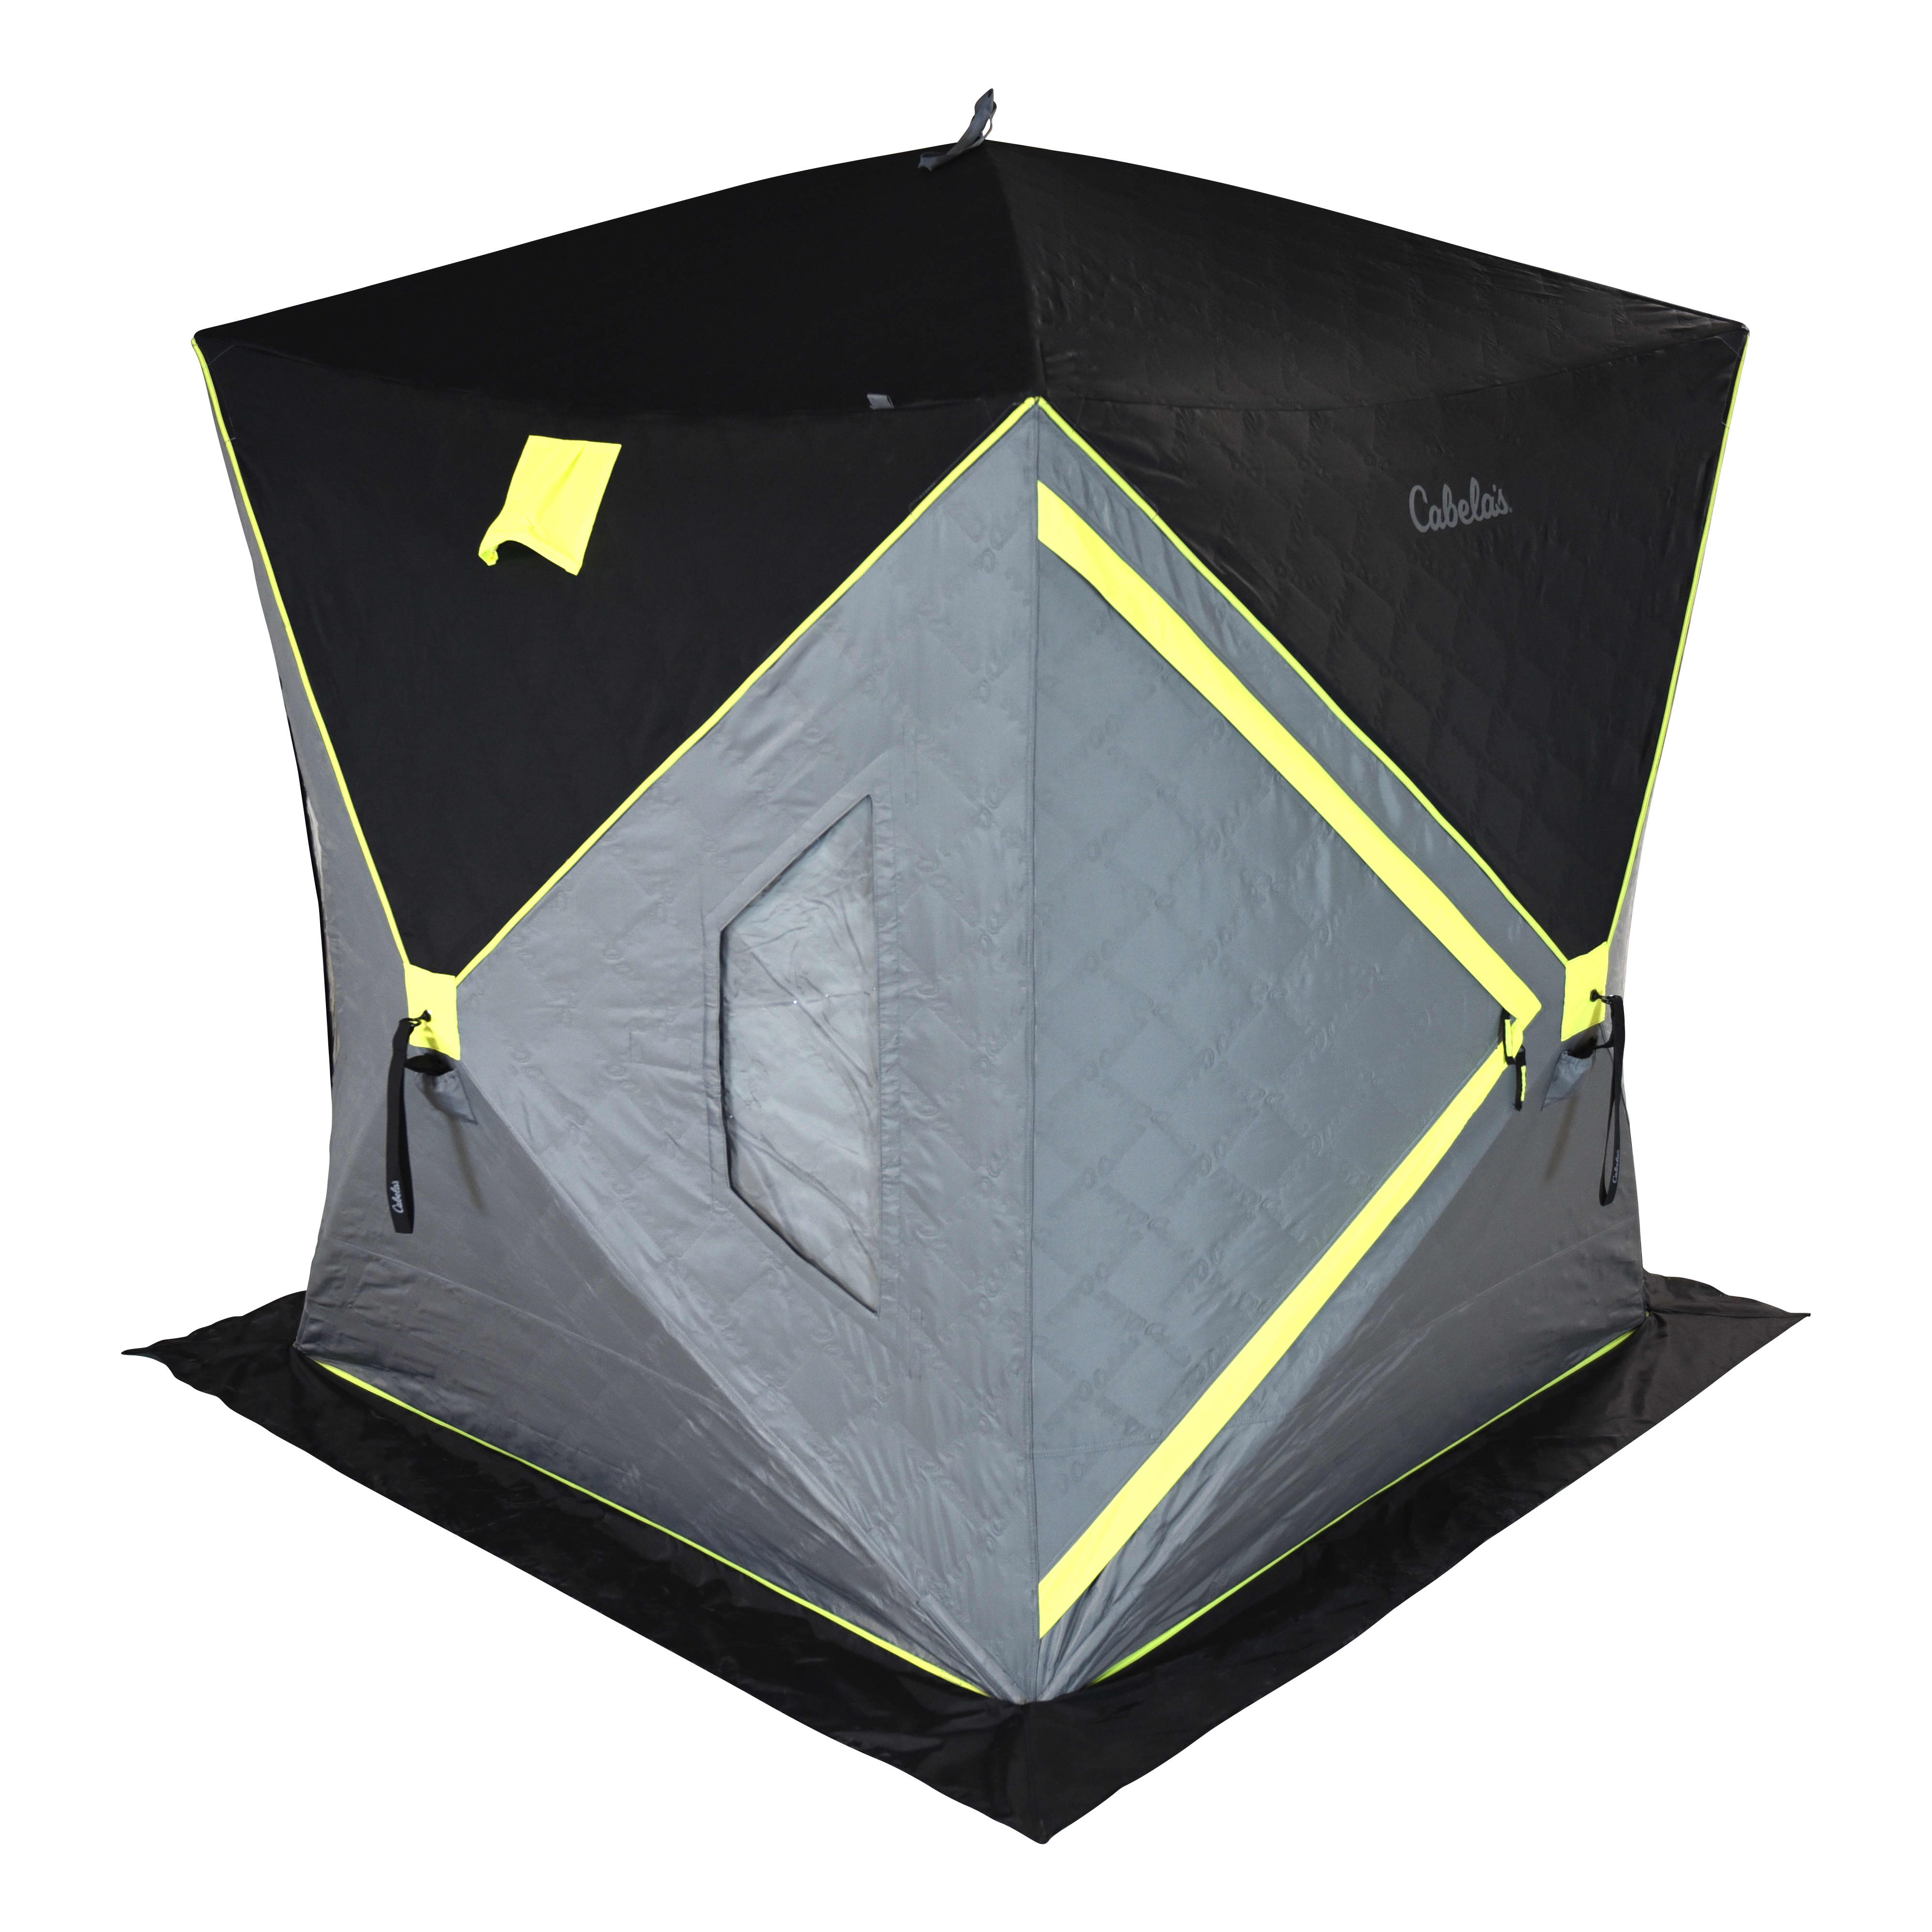  ABXMAS Ice Fishing Shelter 3-4 Person, Portable Insulated Ice  Fishing Tent